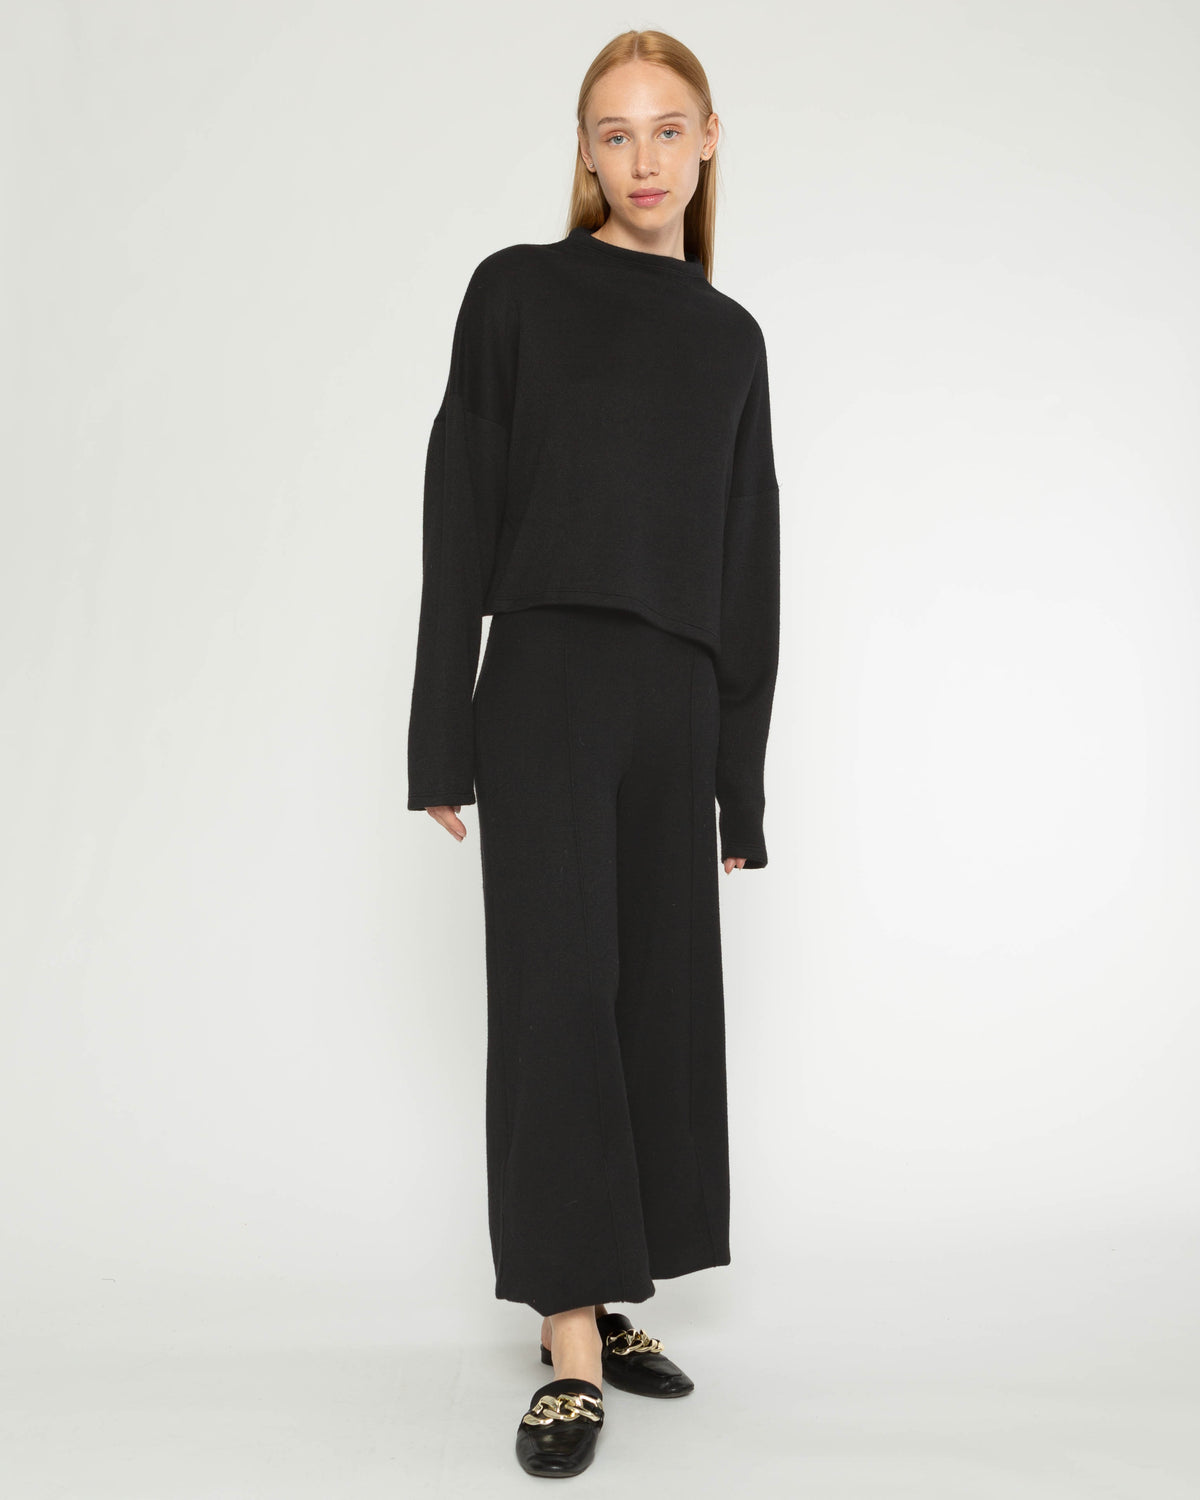 Cashmere-Like Wide Leg Pant in Black